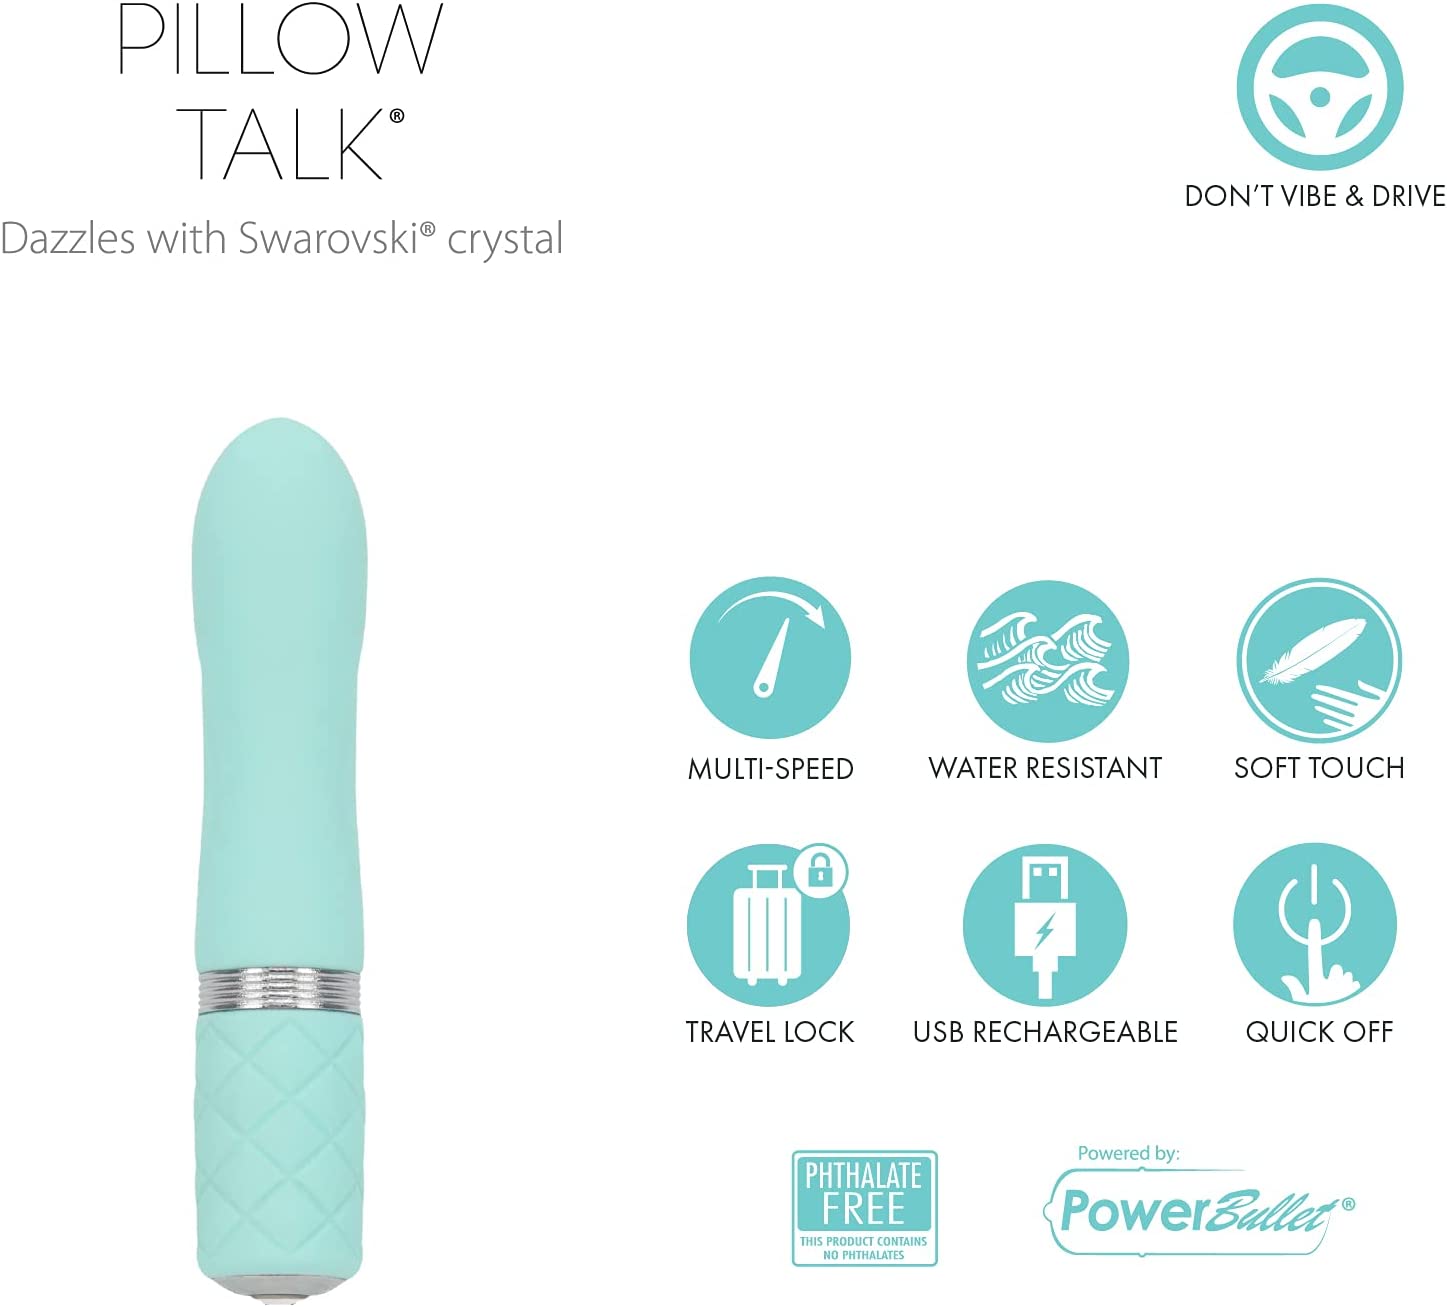 SHOP Pillow Talk Flirty Vibrator Womens Massager | Teal $61.95AUD  Delicately contoured and super silky to the touch, the Flirty is beautiful, fun and powerful. Packed with enough strength for even the most experienced hand, the soft, flexible body will have you